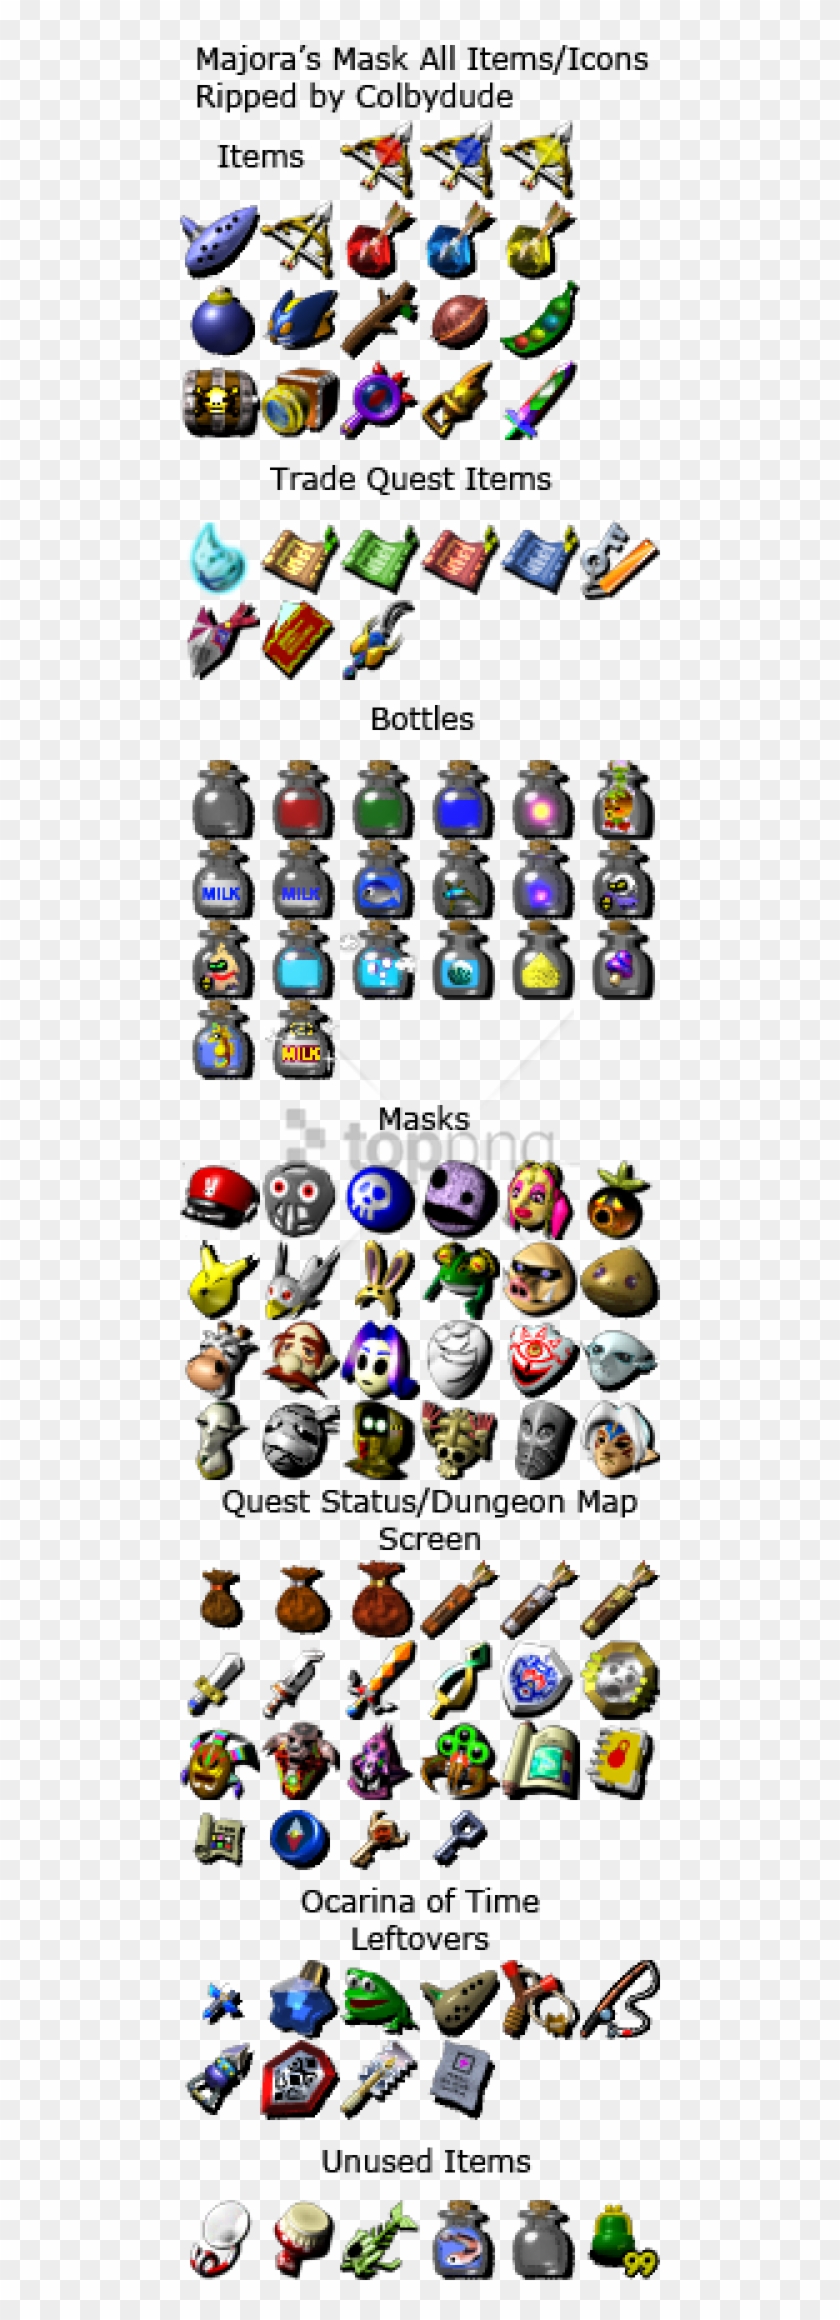 Free Png Item Icons - Majora's Mask Item Icons Clipart #2910908